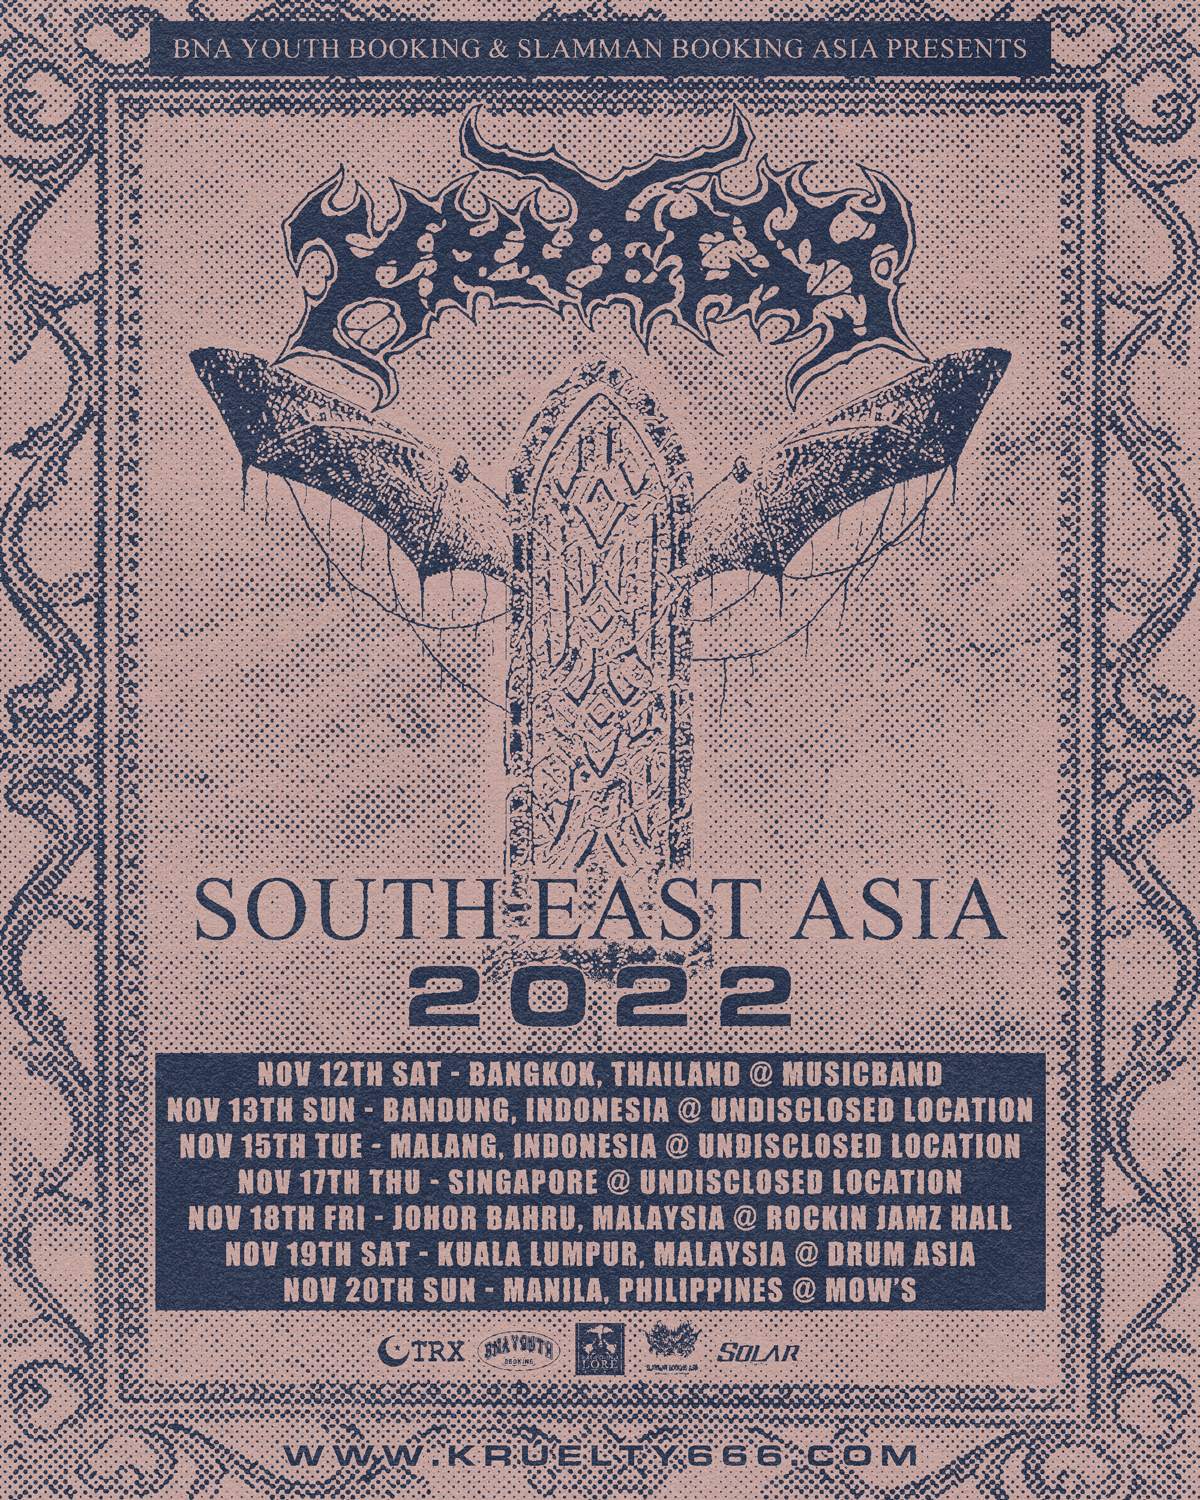 KRUELTY South East Asia Tour